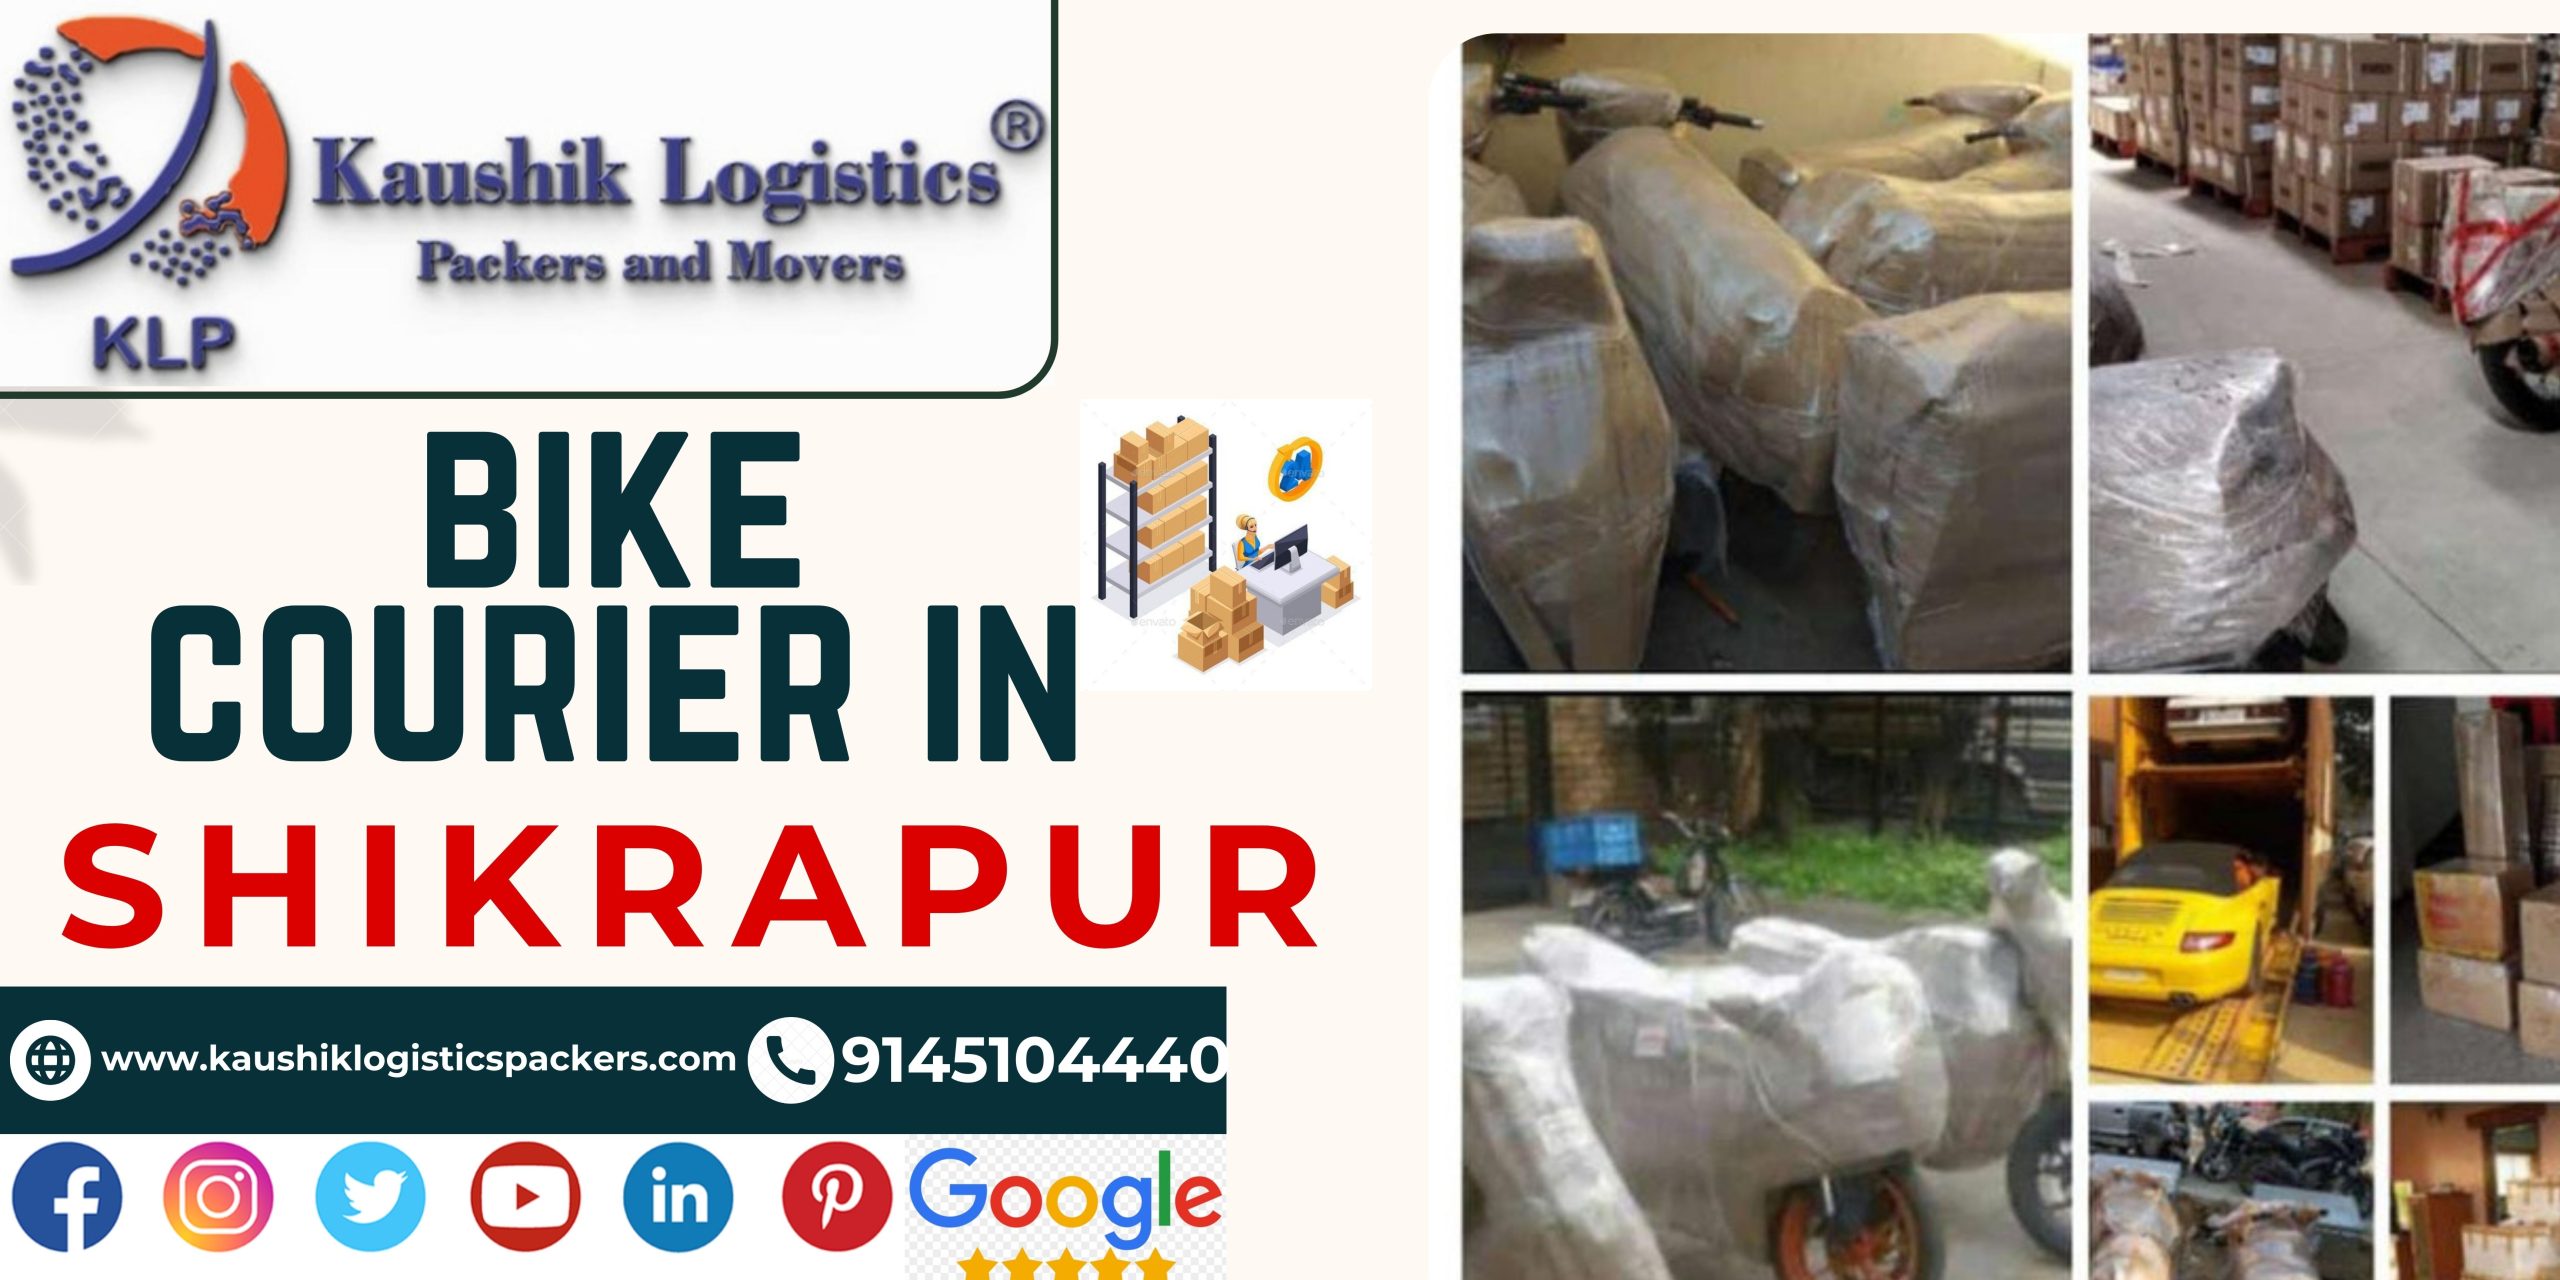 Packers and Movers In Shikrapur